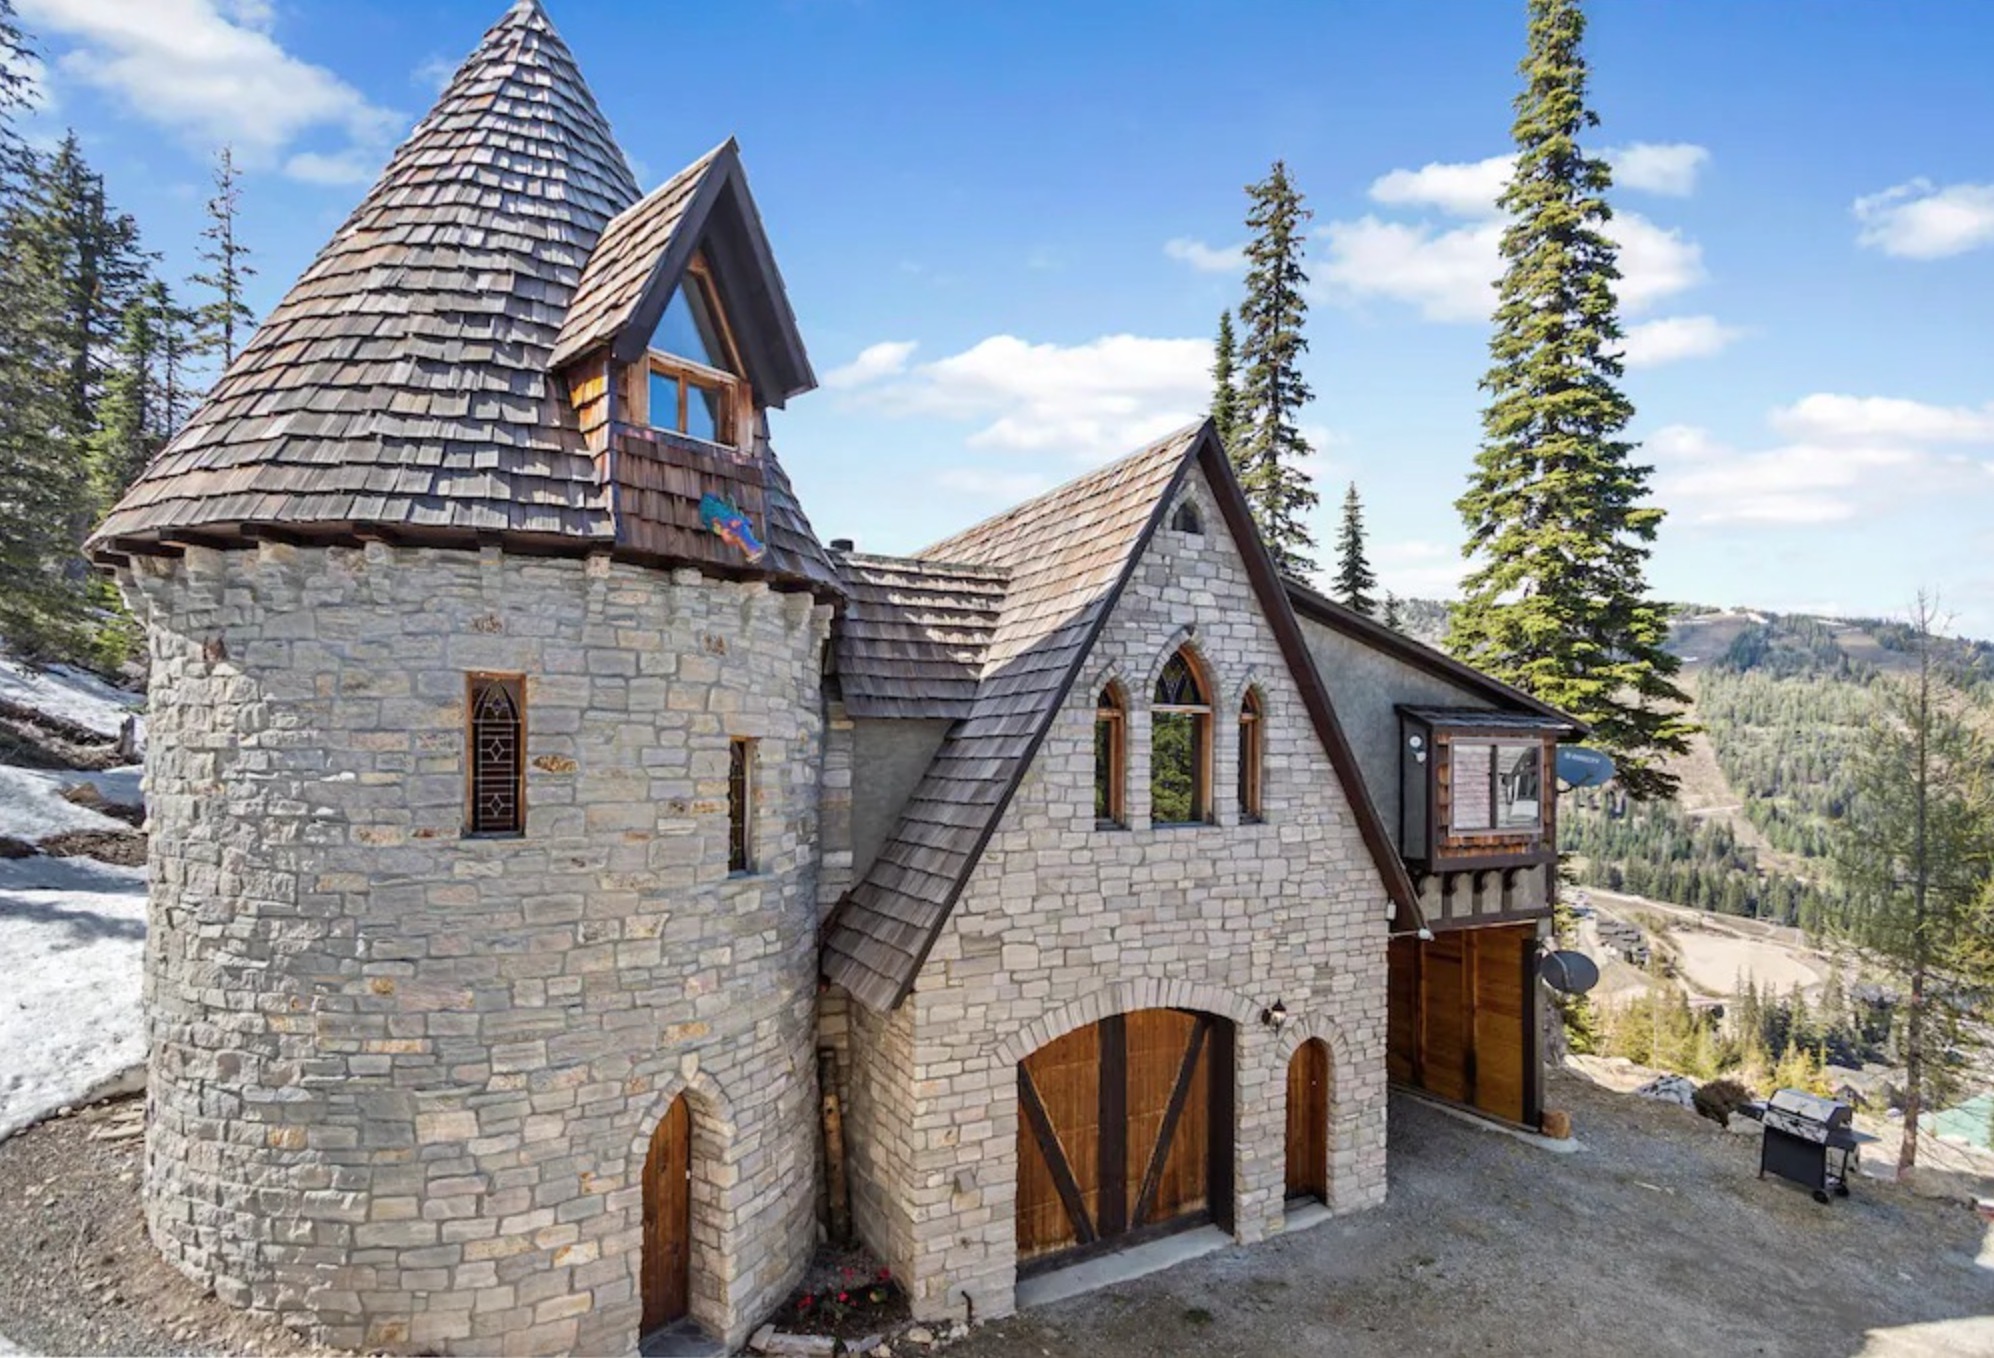 FOR RENT: A Medieval Castle At Schweitzer Resort ($609 A Night)